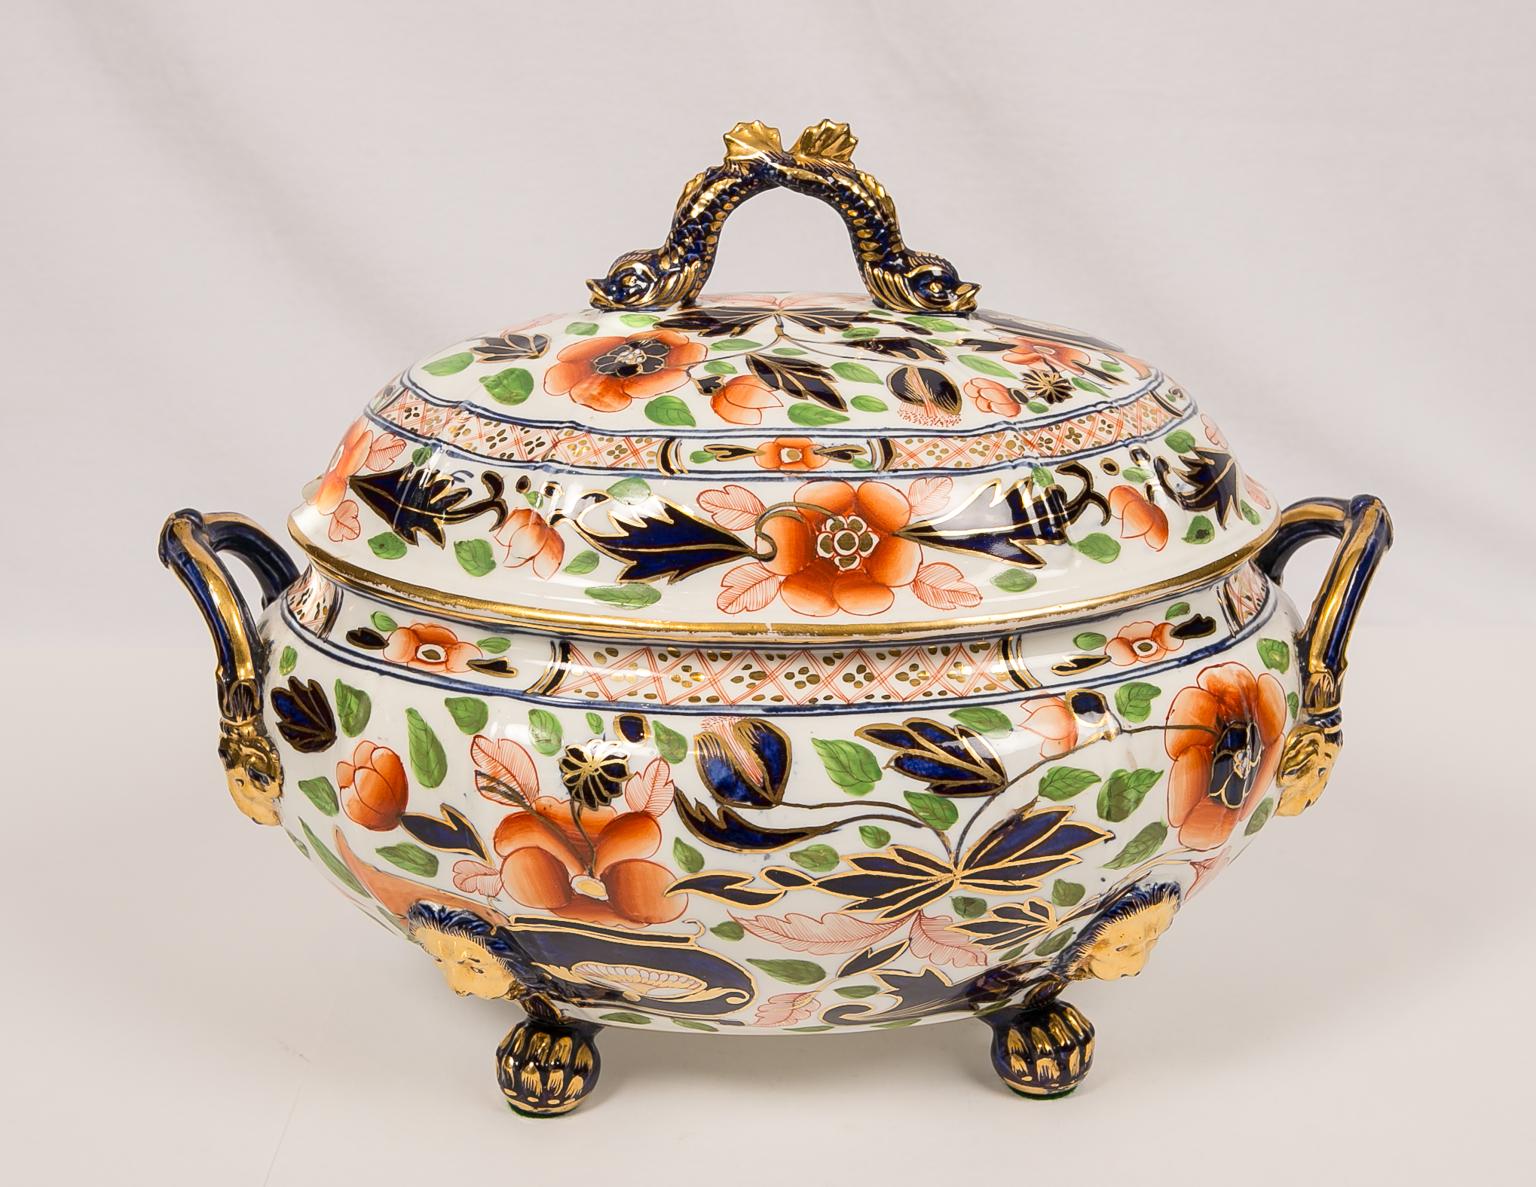 A large antique English porcelain soup tureen and stand decorated with a colorful Imari design showing an overflowing vase on the garden terrace. This tureen and stand has eye-catching deep cobalt blue finials, handles, and trim which are decorated